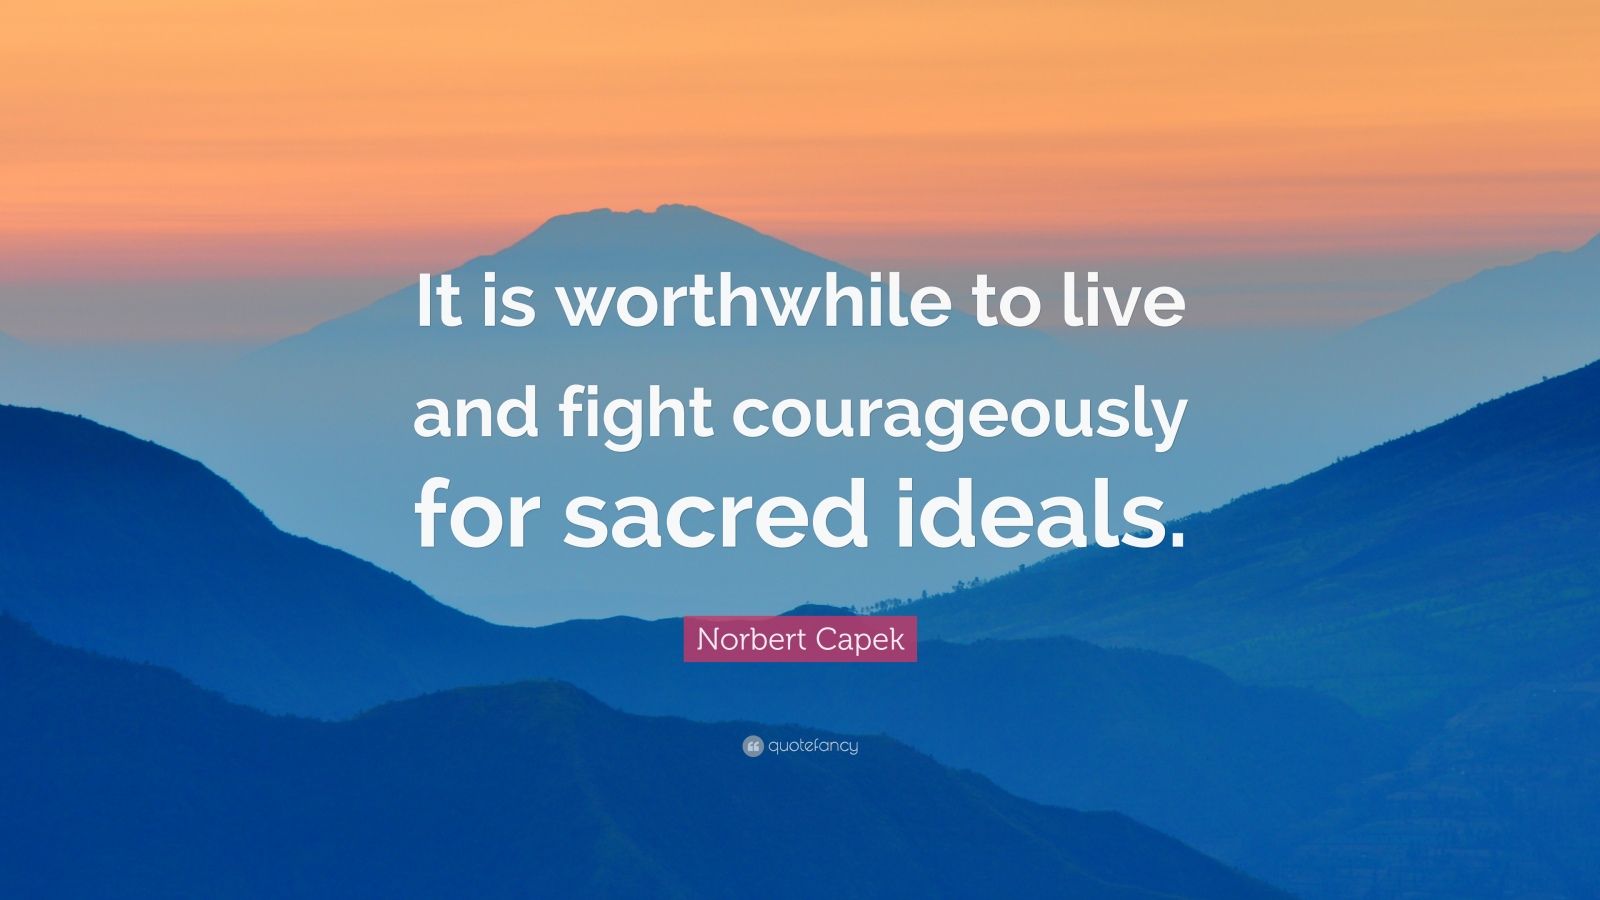 Norbert Capek Quote: “It is worthwhile to live and fight courageously